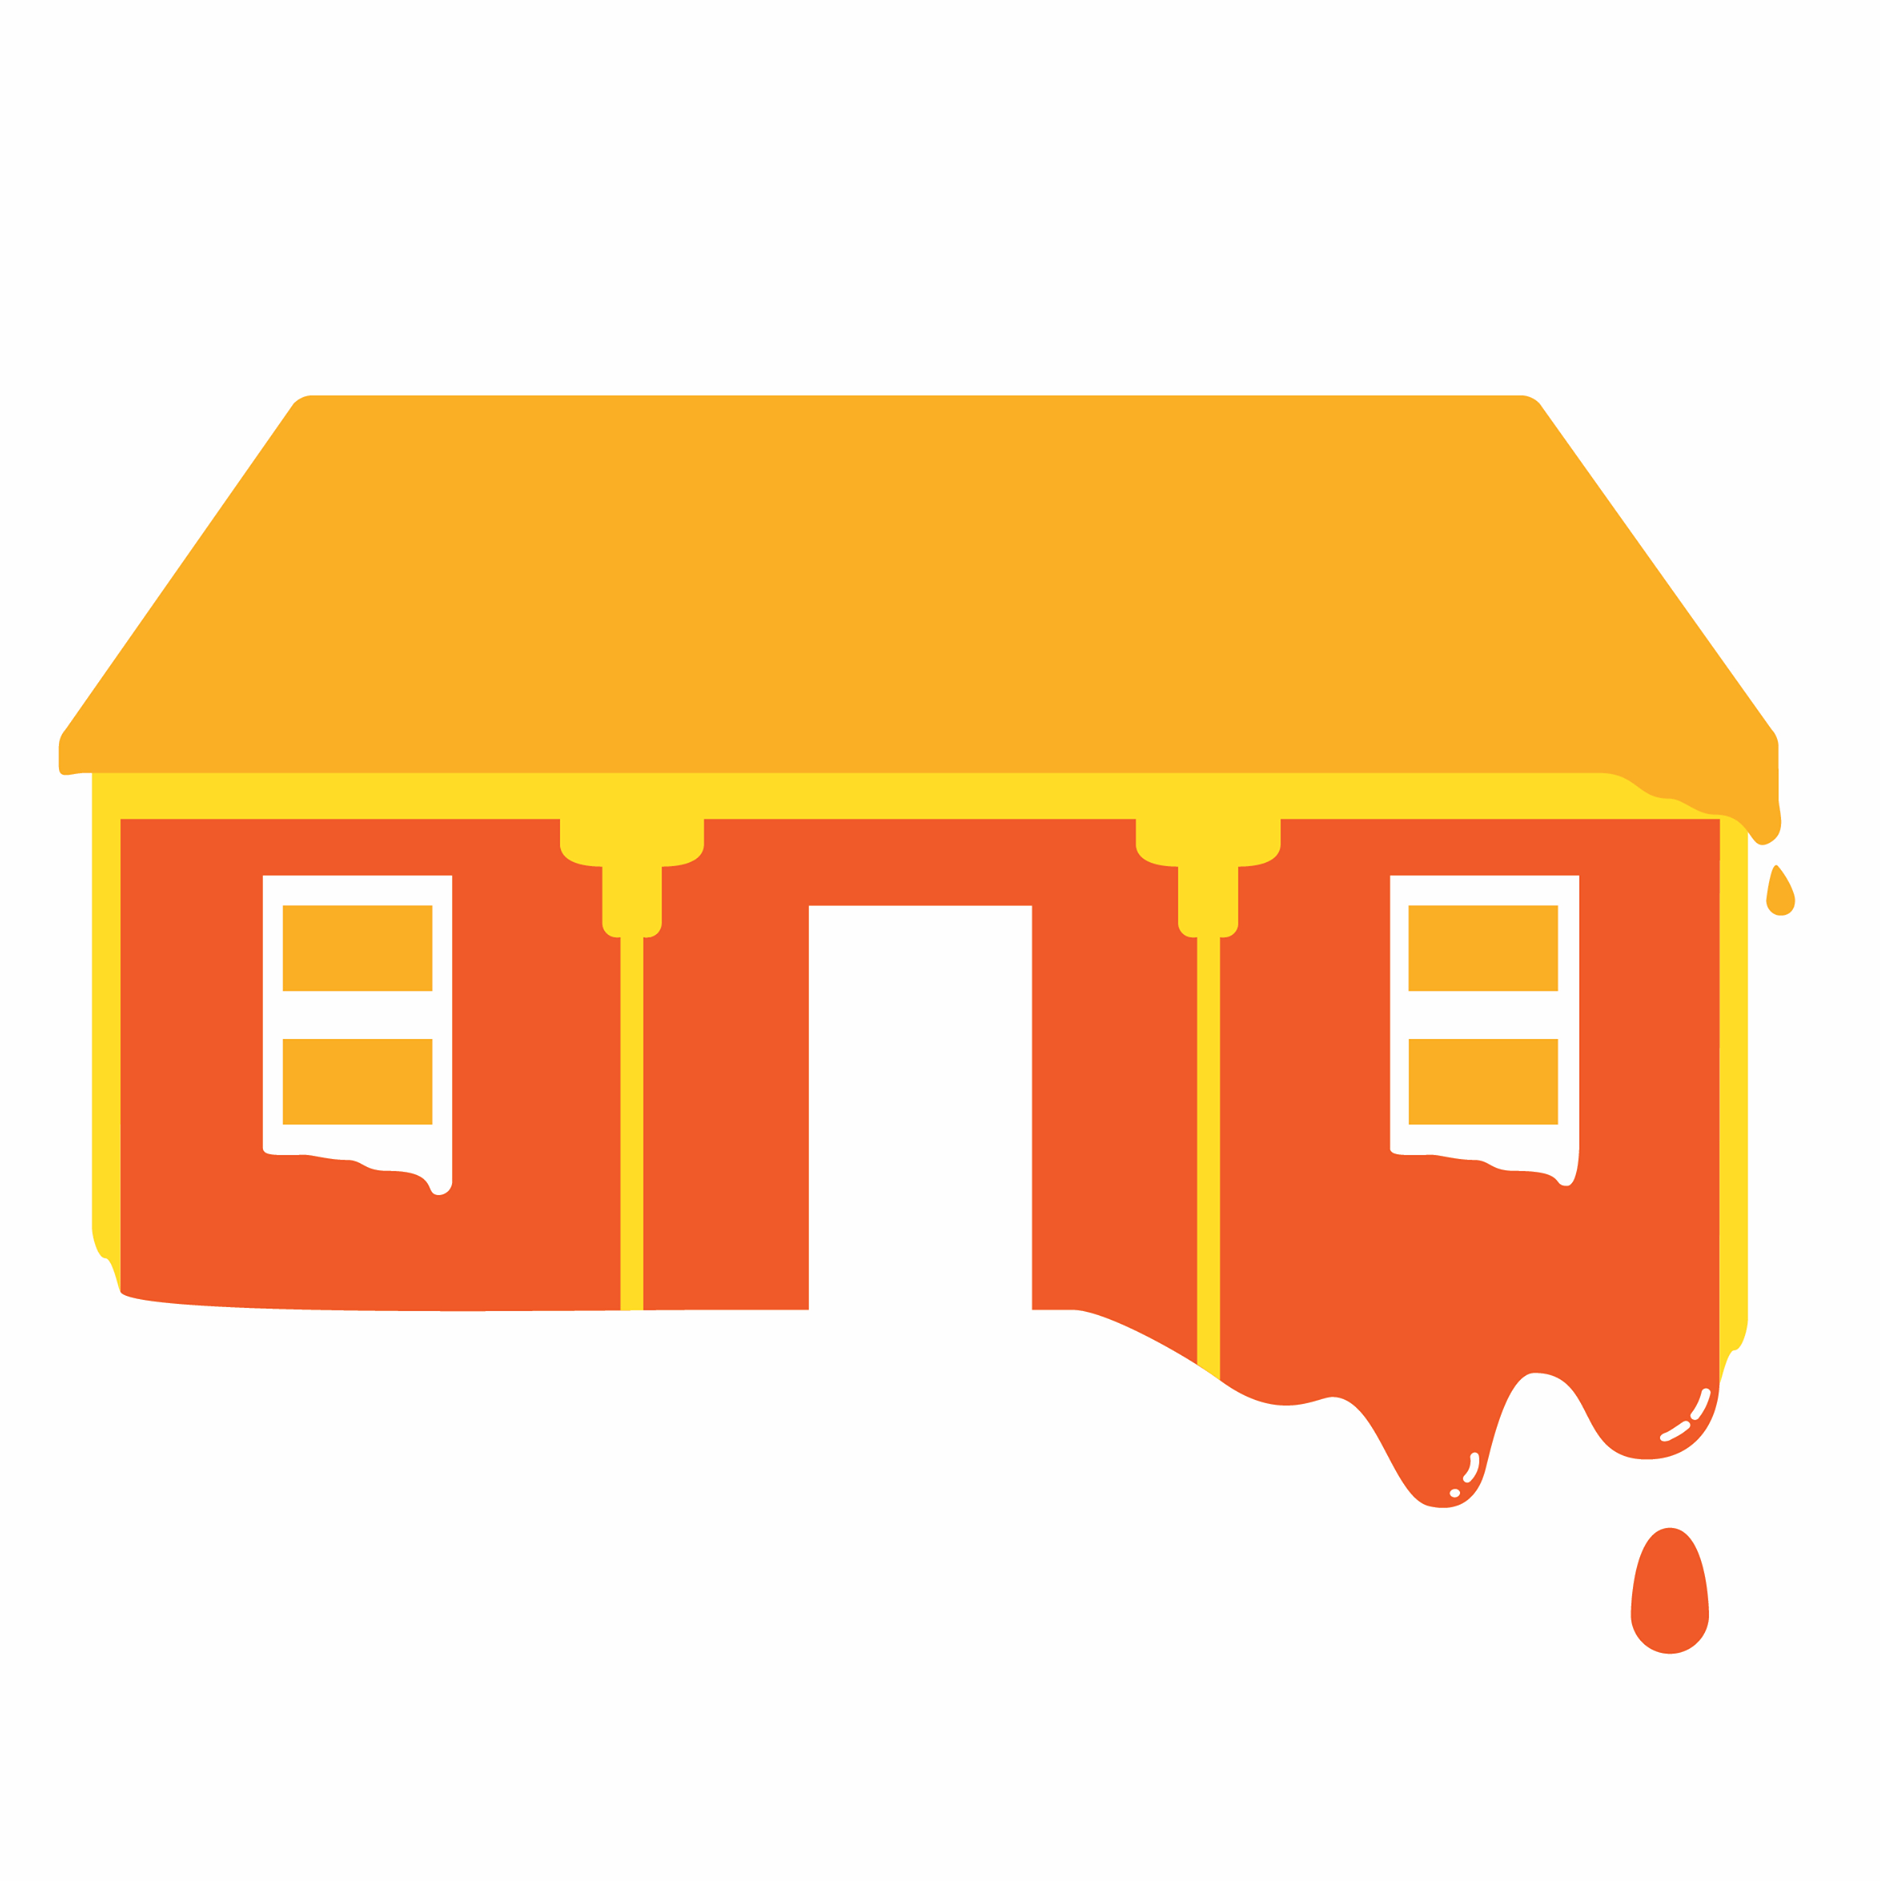 Image of a house melting, logo of Sweltering cities campaign